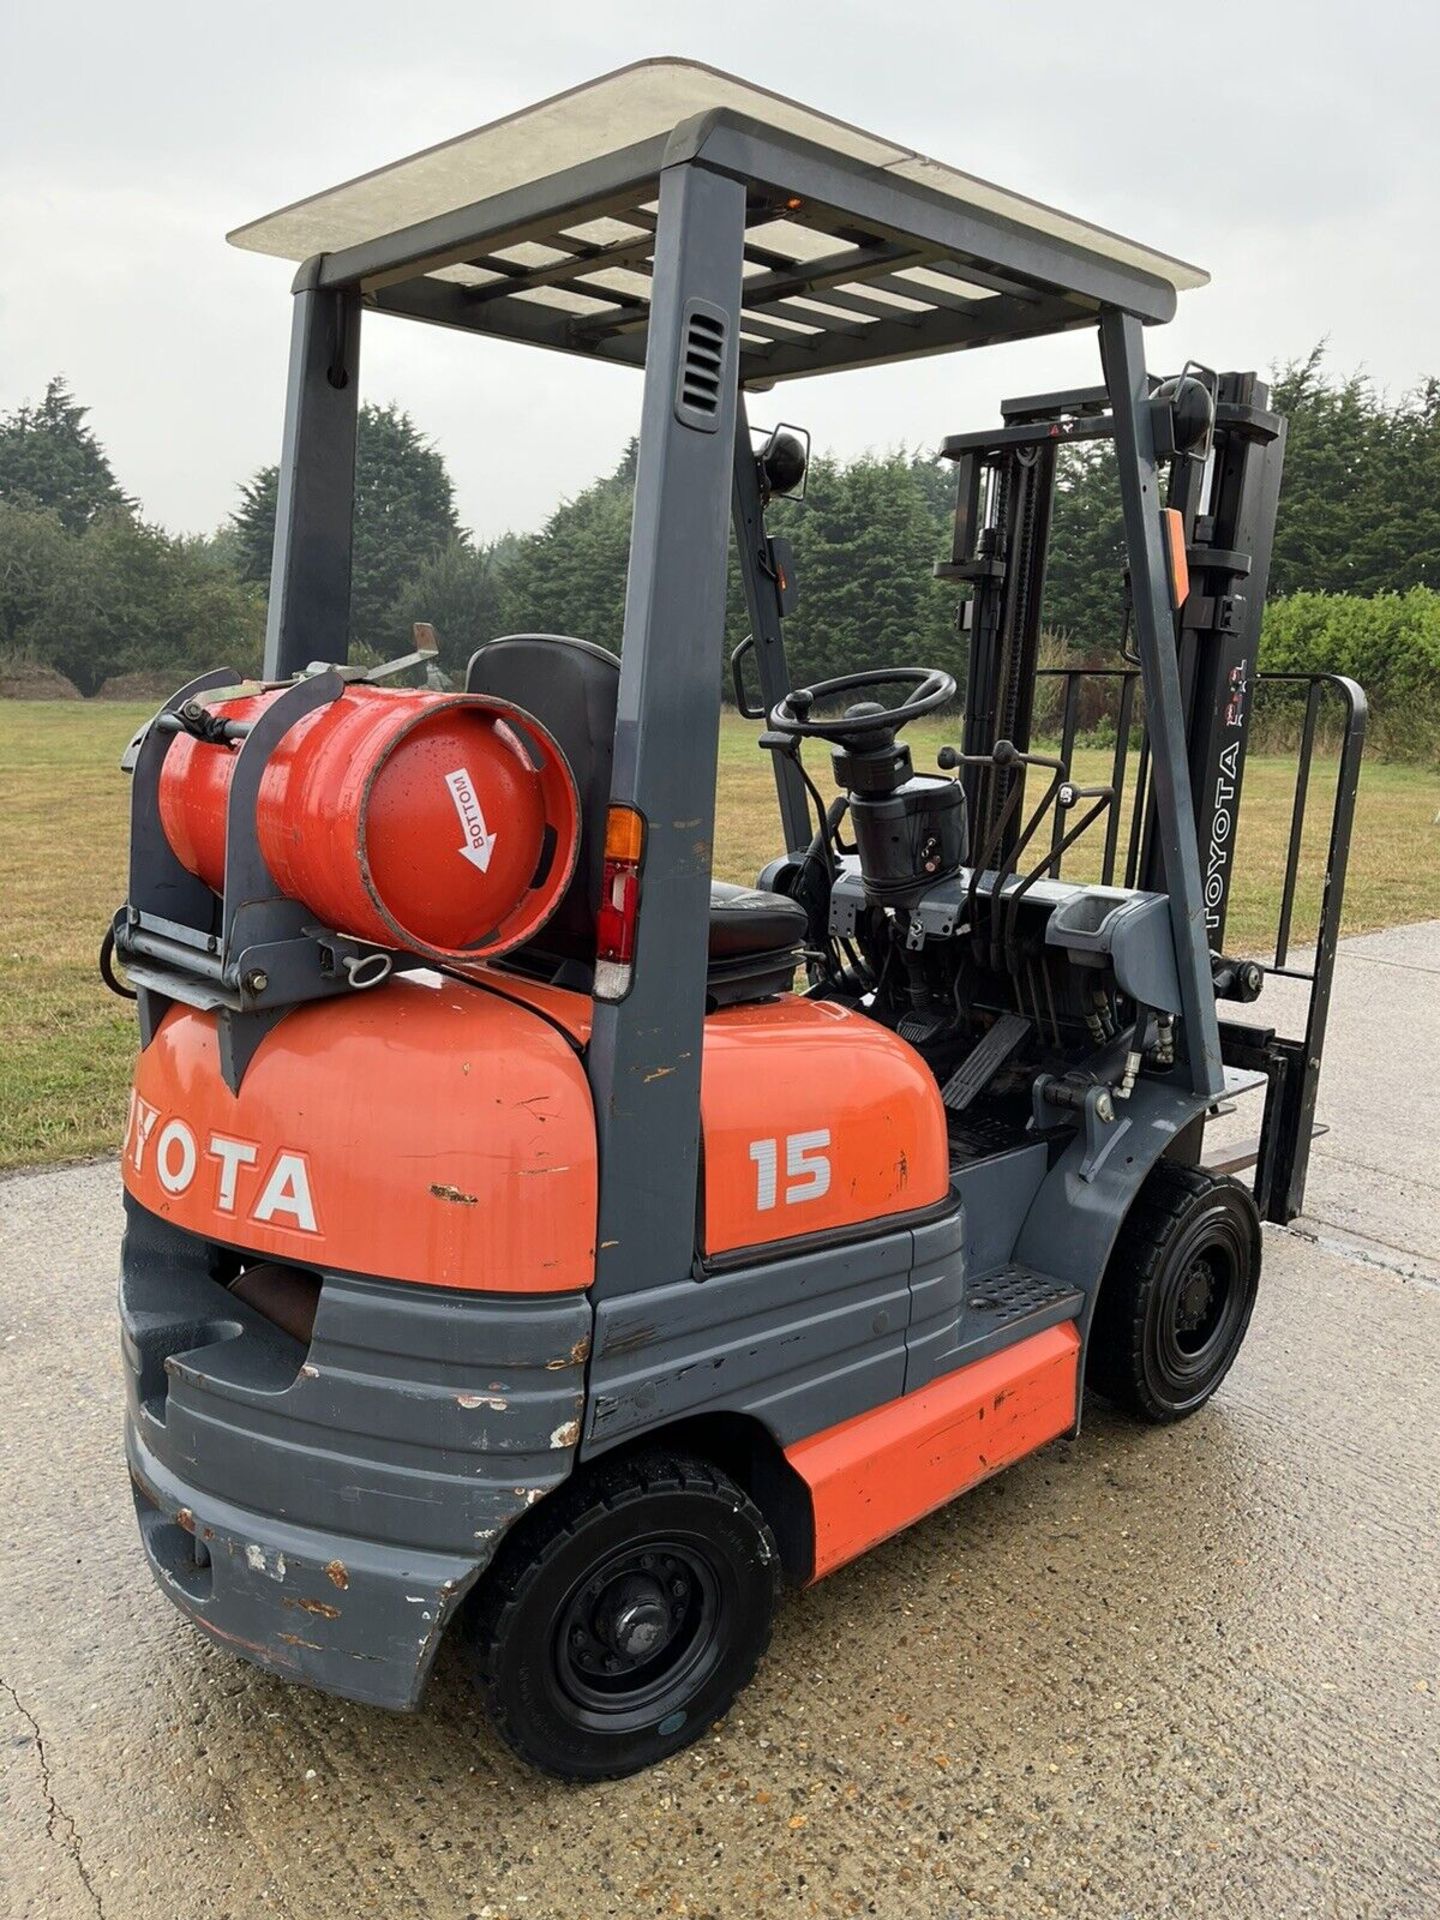 Toyota 1.5 Tonne Gas Forklift Truck - Image 3 of 4